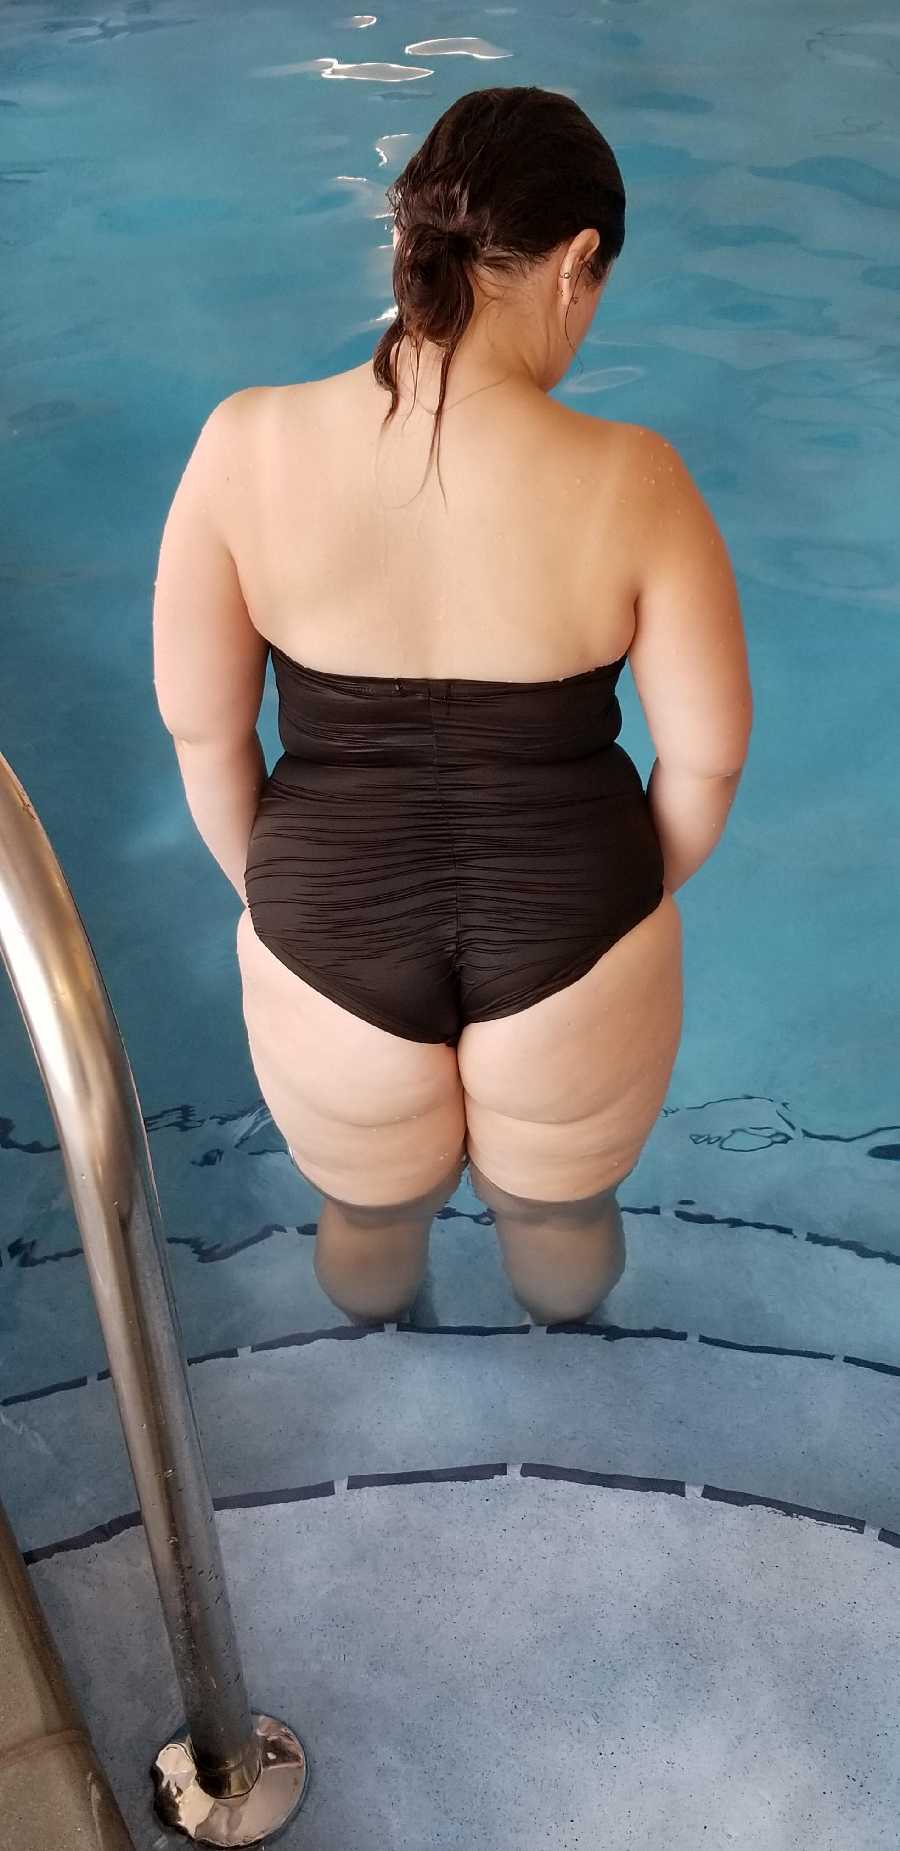 Flashing at the Hotel Pool